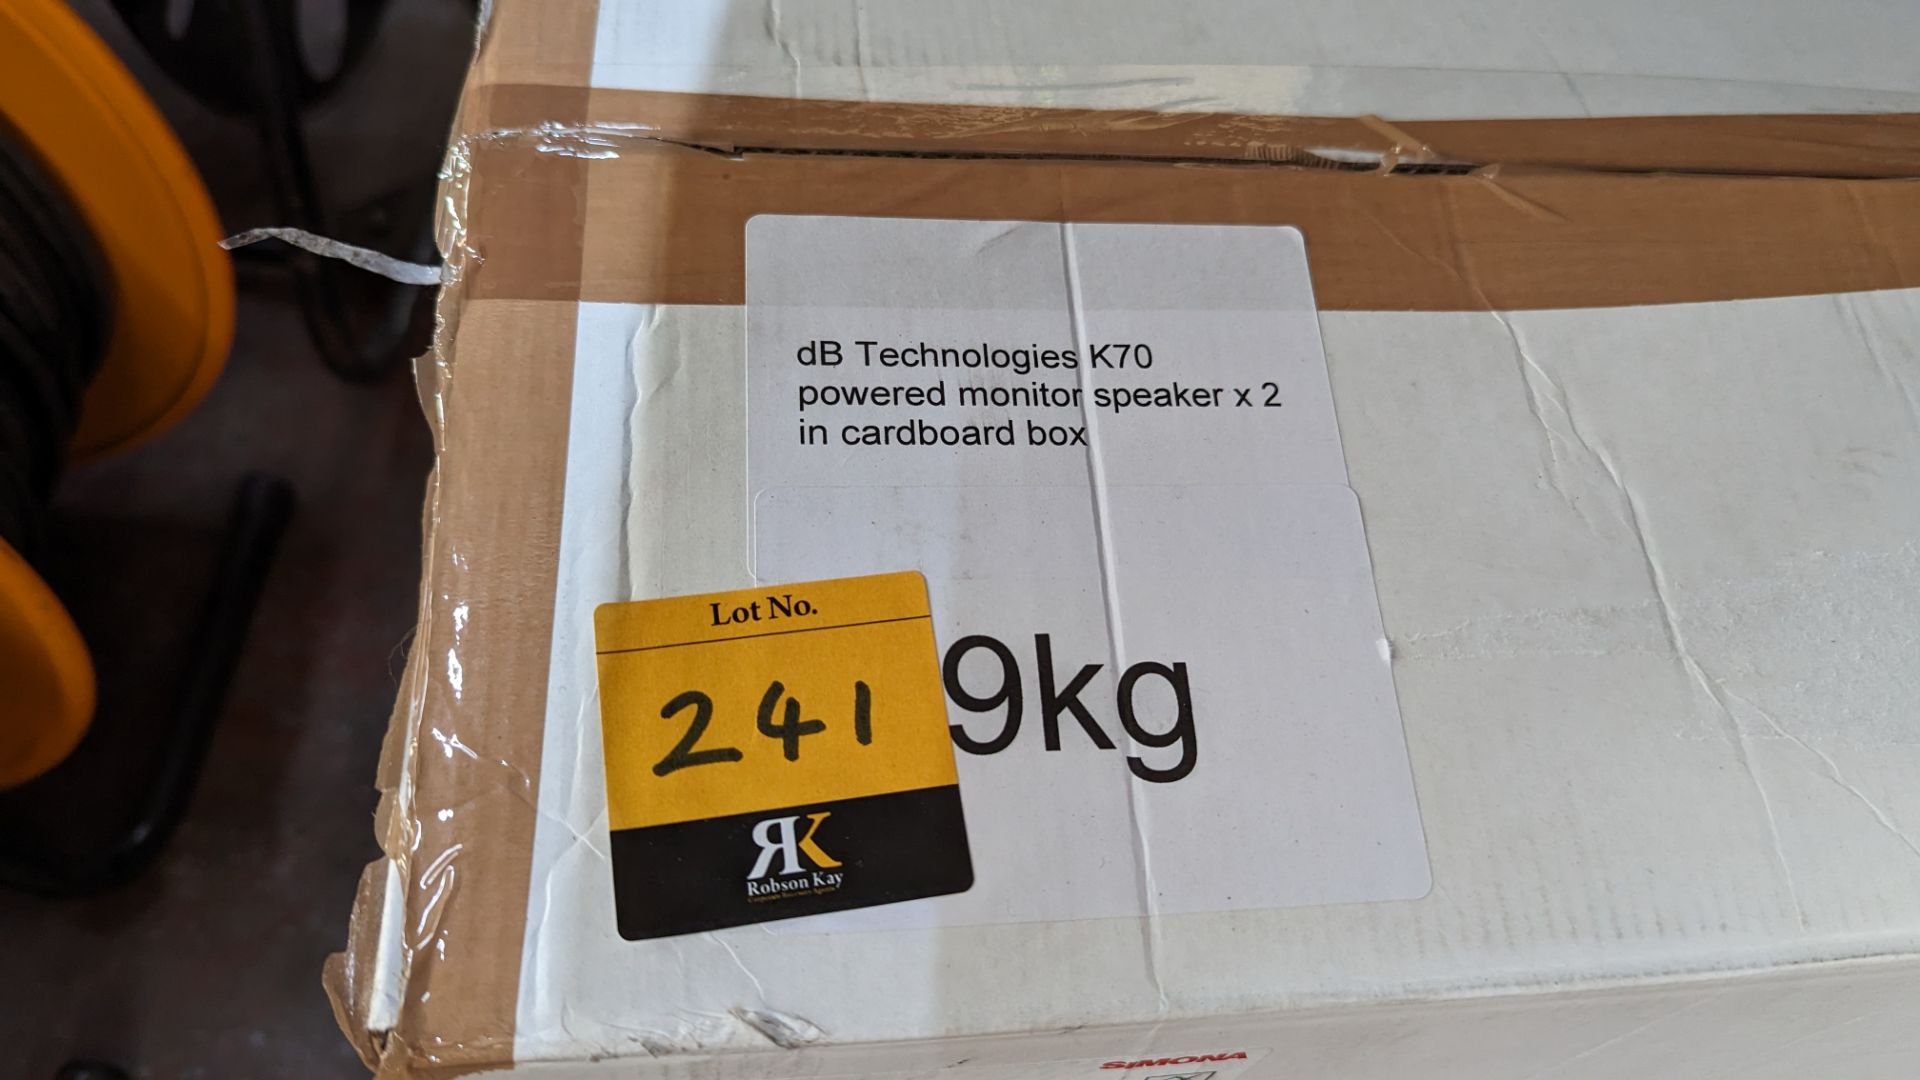 Pair of DB Technologies K70 powered monitor speakers, in cardboard box. Total lot weight: 9kg - Image 5 of 5